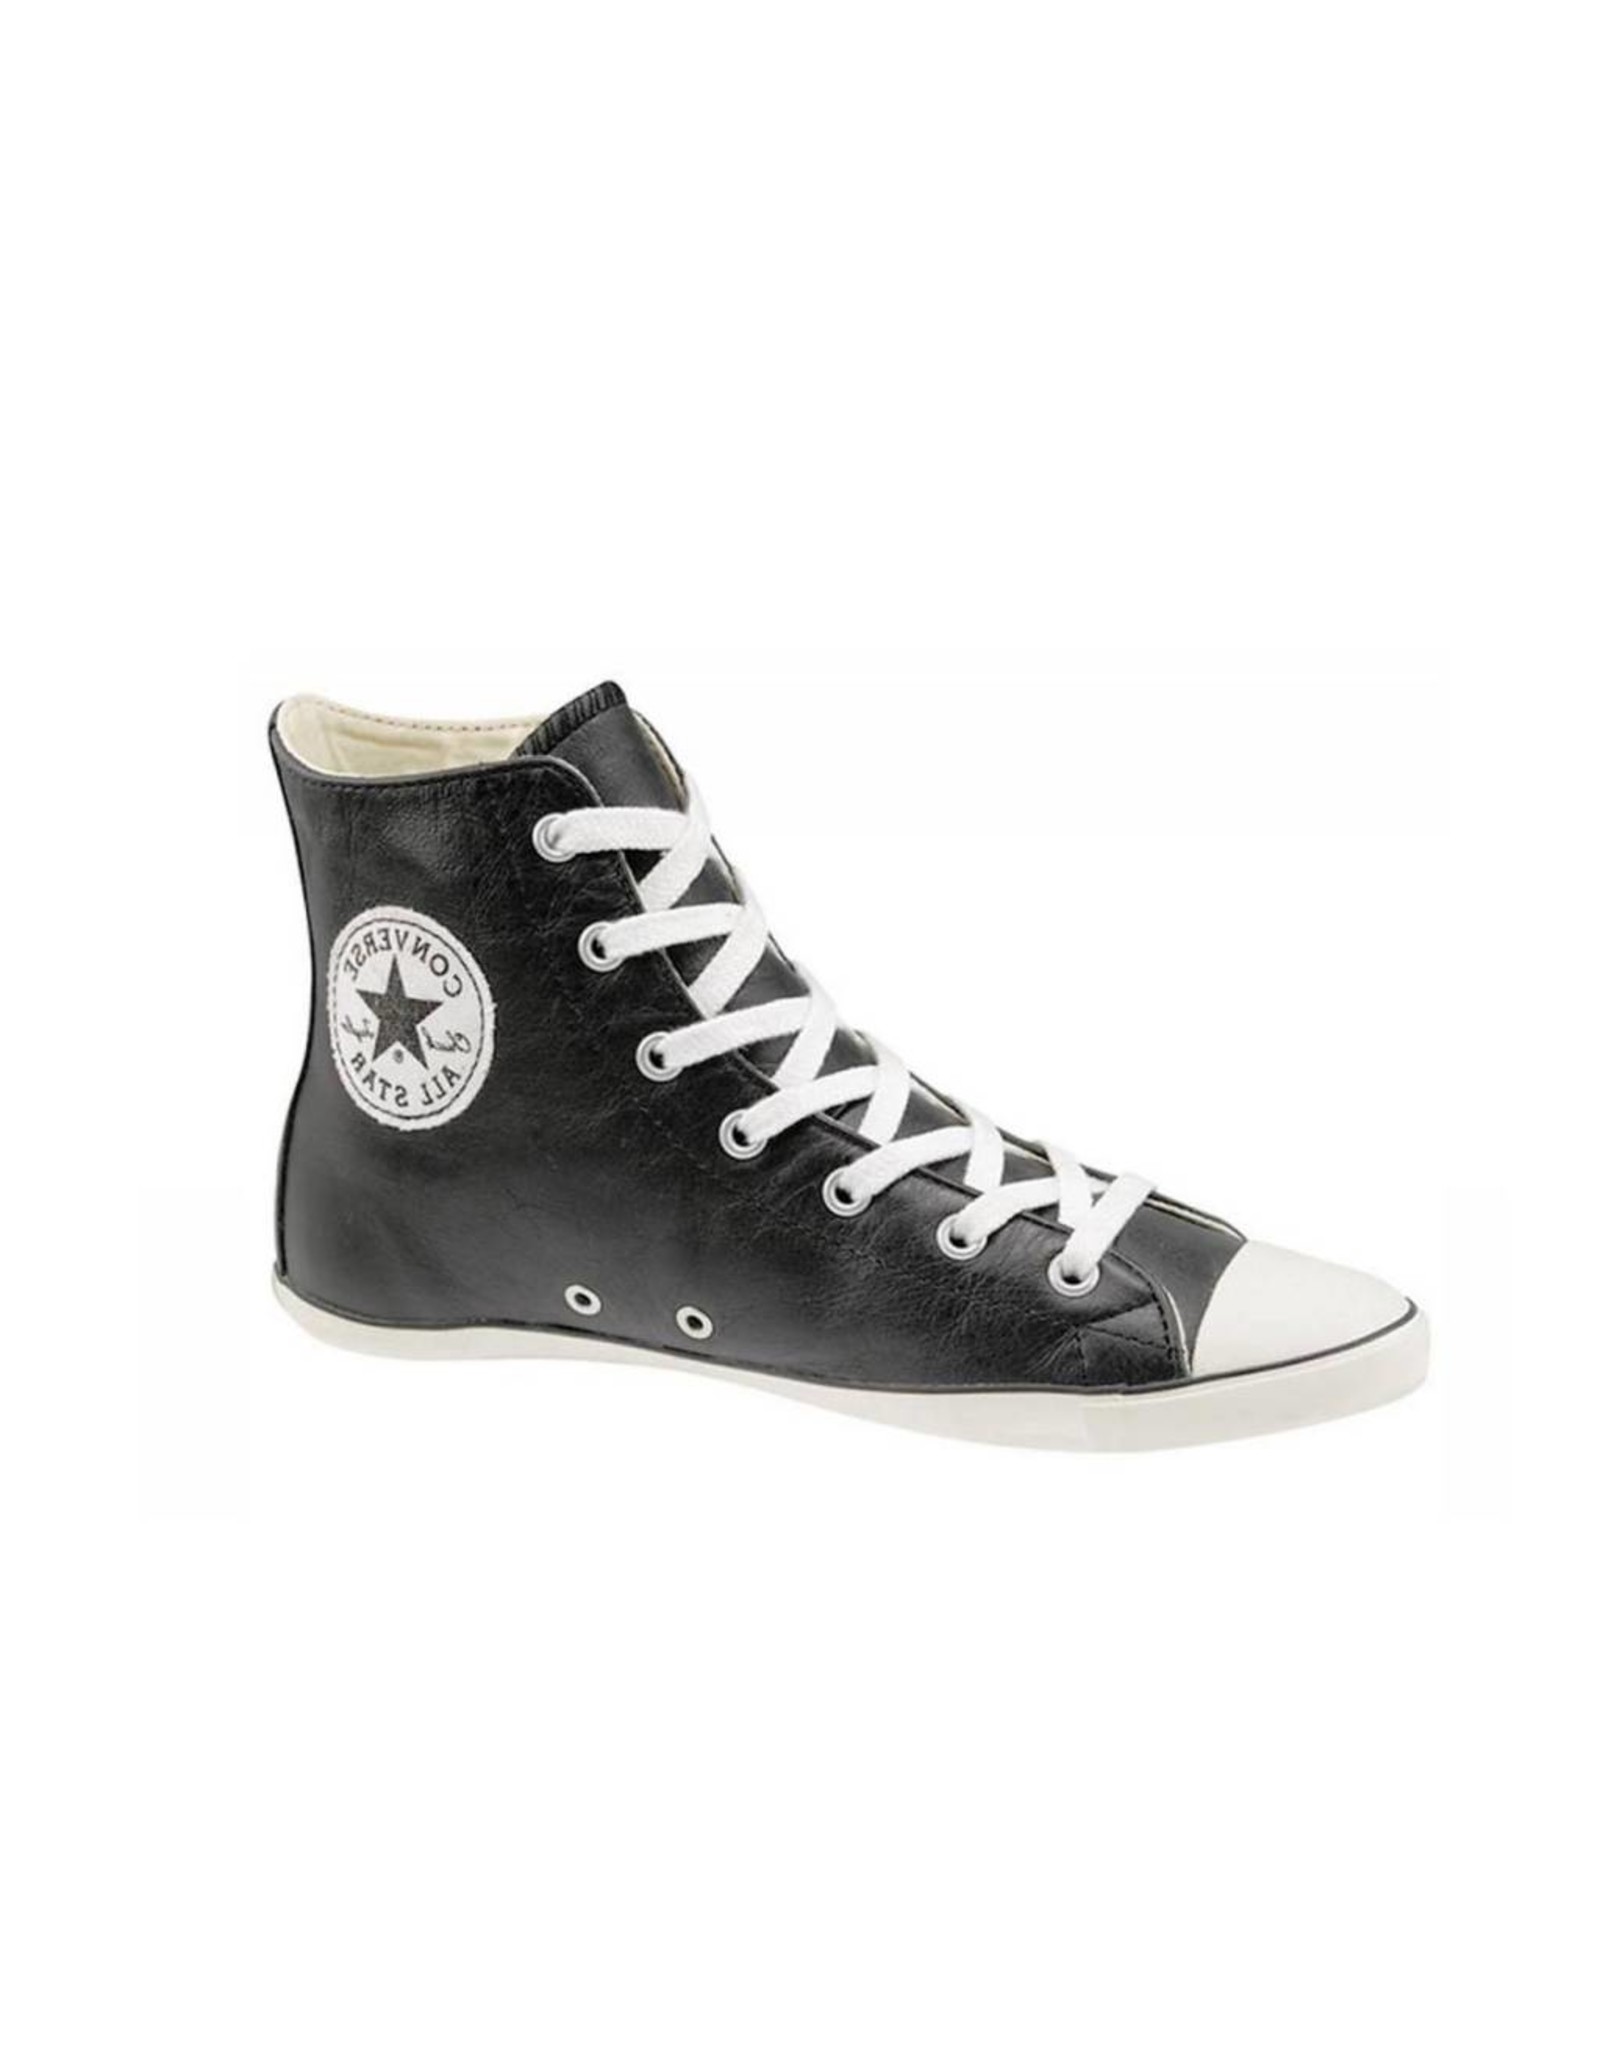 converse light white leather